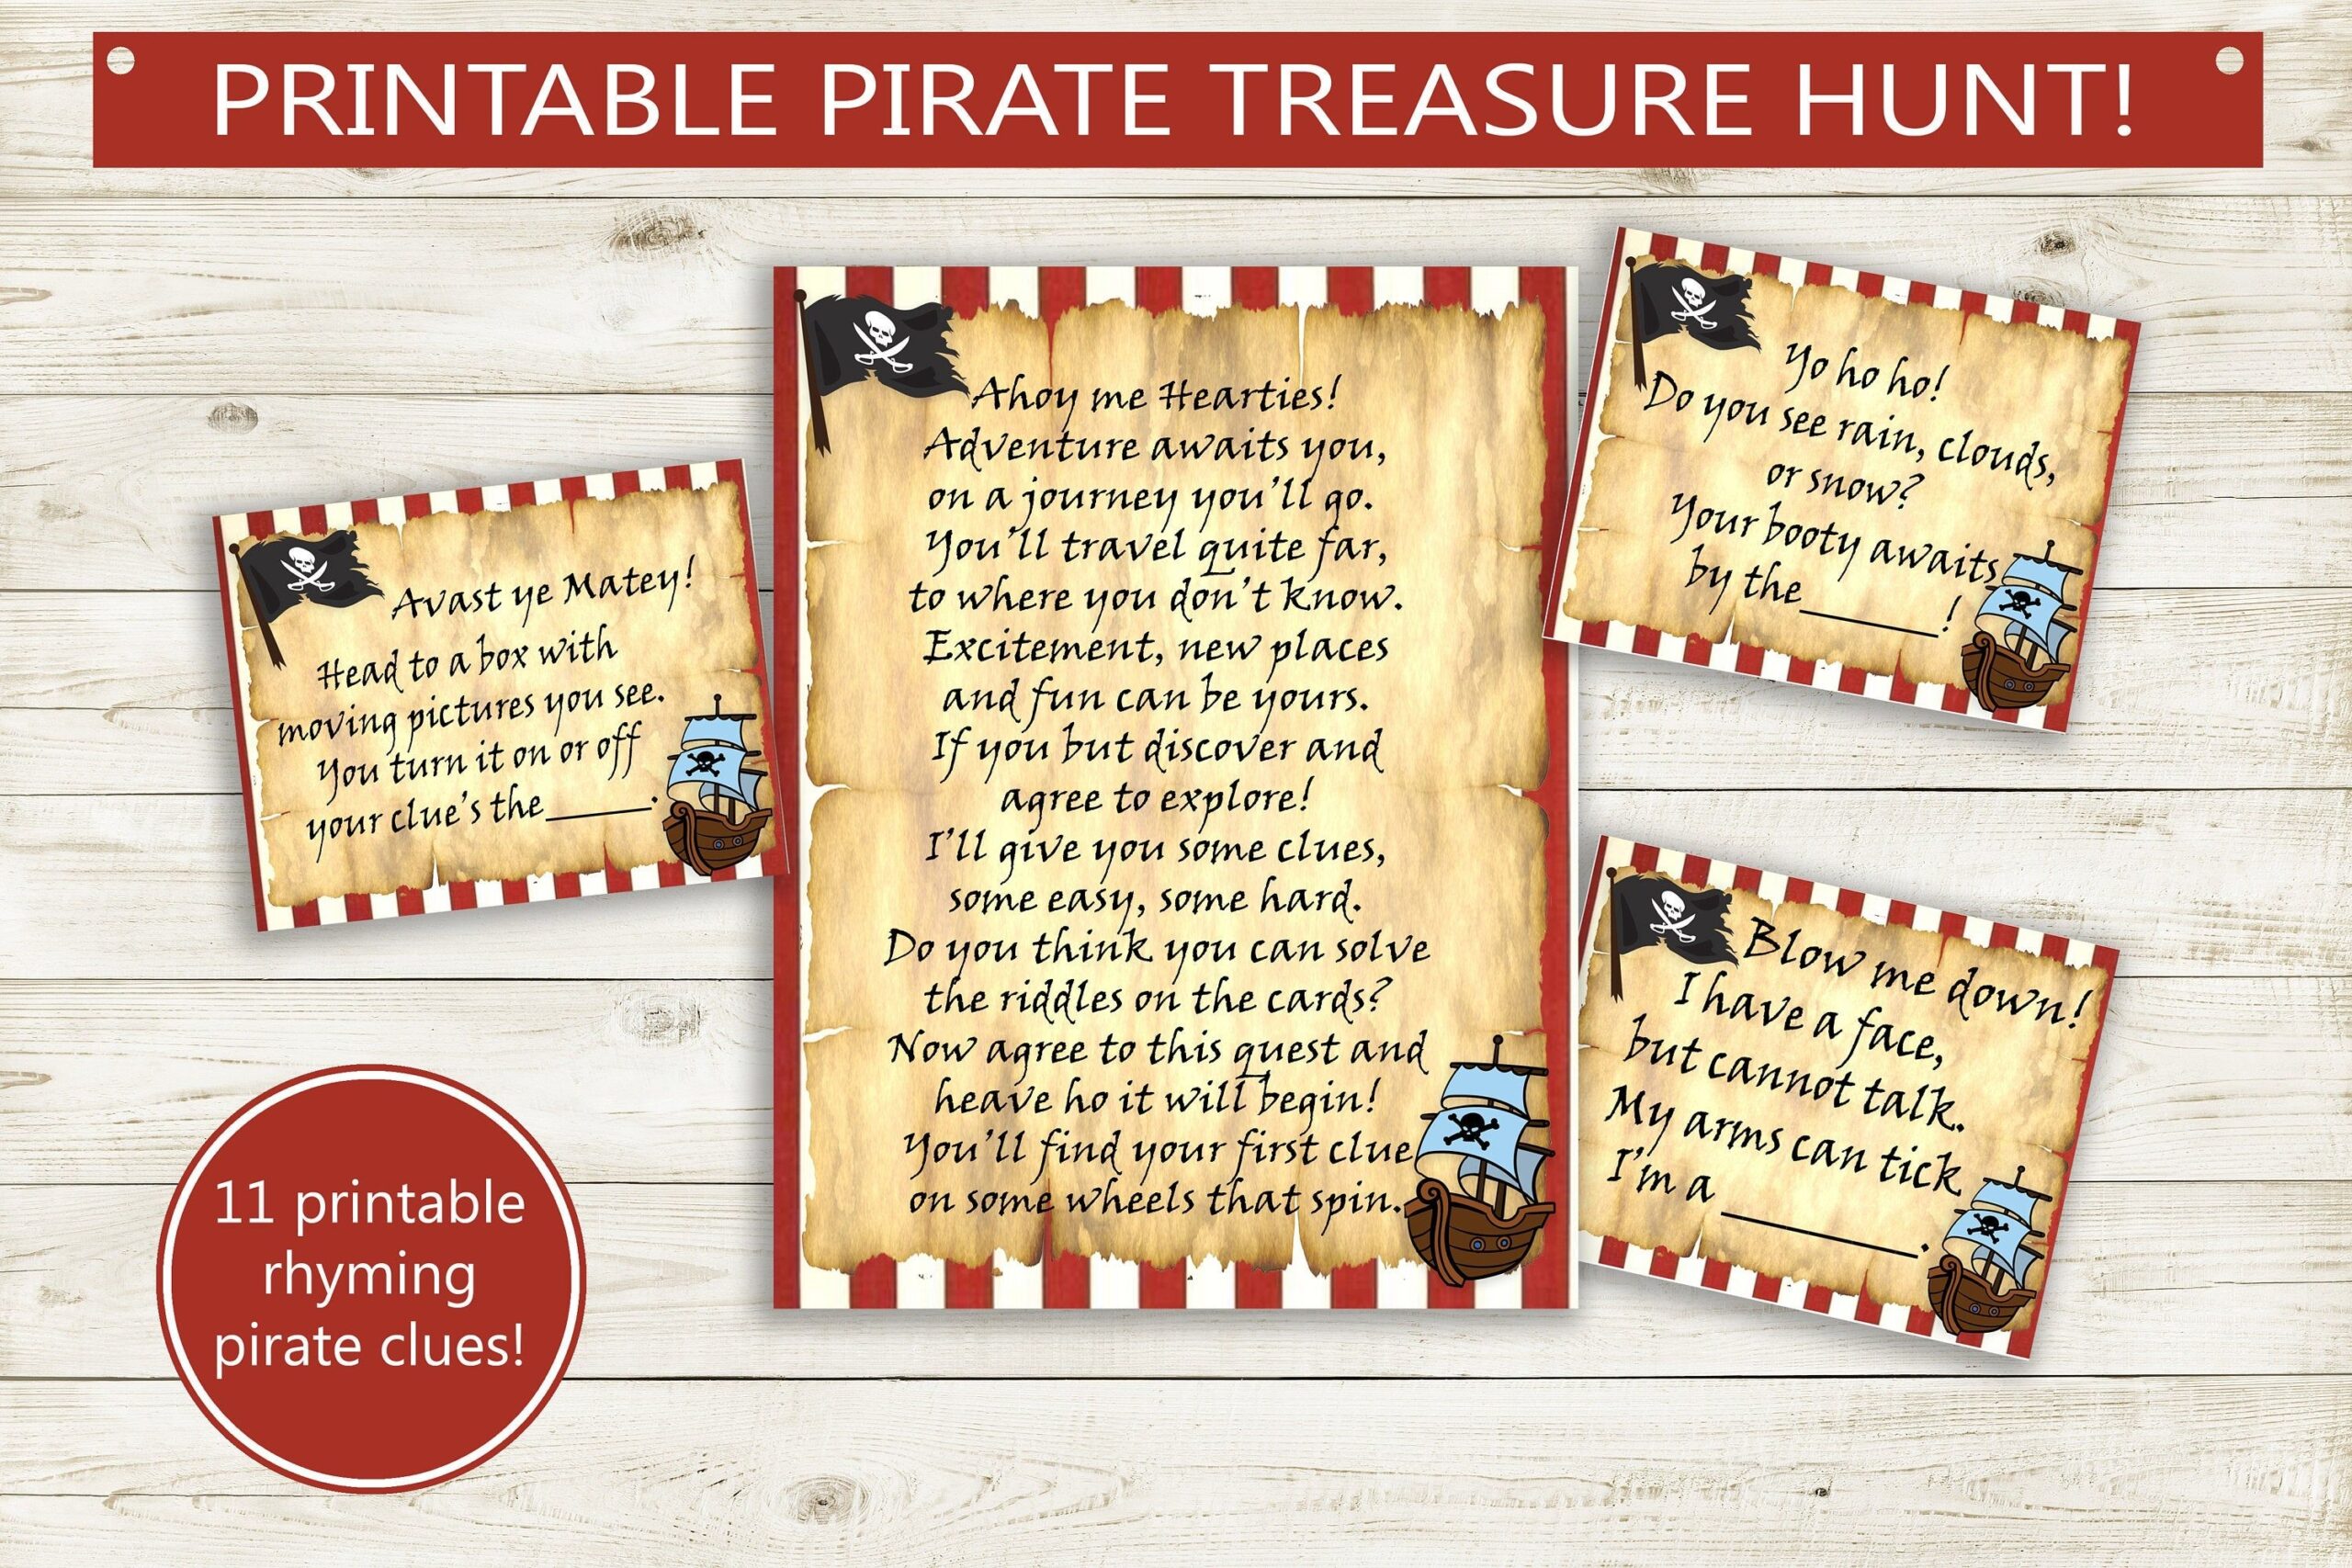 Pirate Printable Treasure Hunt Letter Clues Instant Download PDF Surprise Scavenger Hunt Party Game Birthday File Rhyming Clues DIY Etsy Pirate Treasure Hunt For Kids Custom Sticky Notes Treasure Hunt